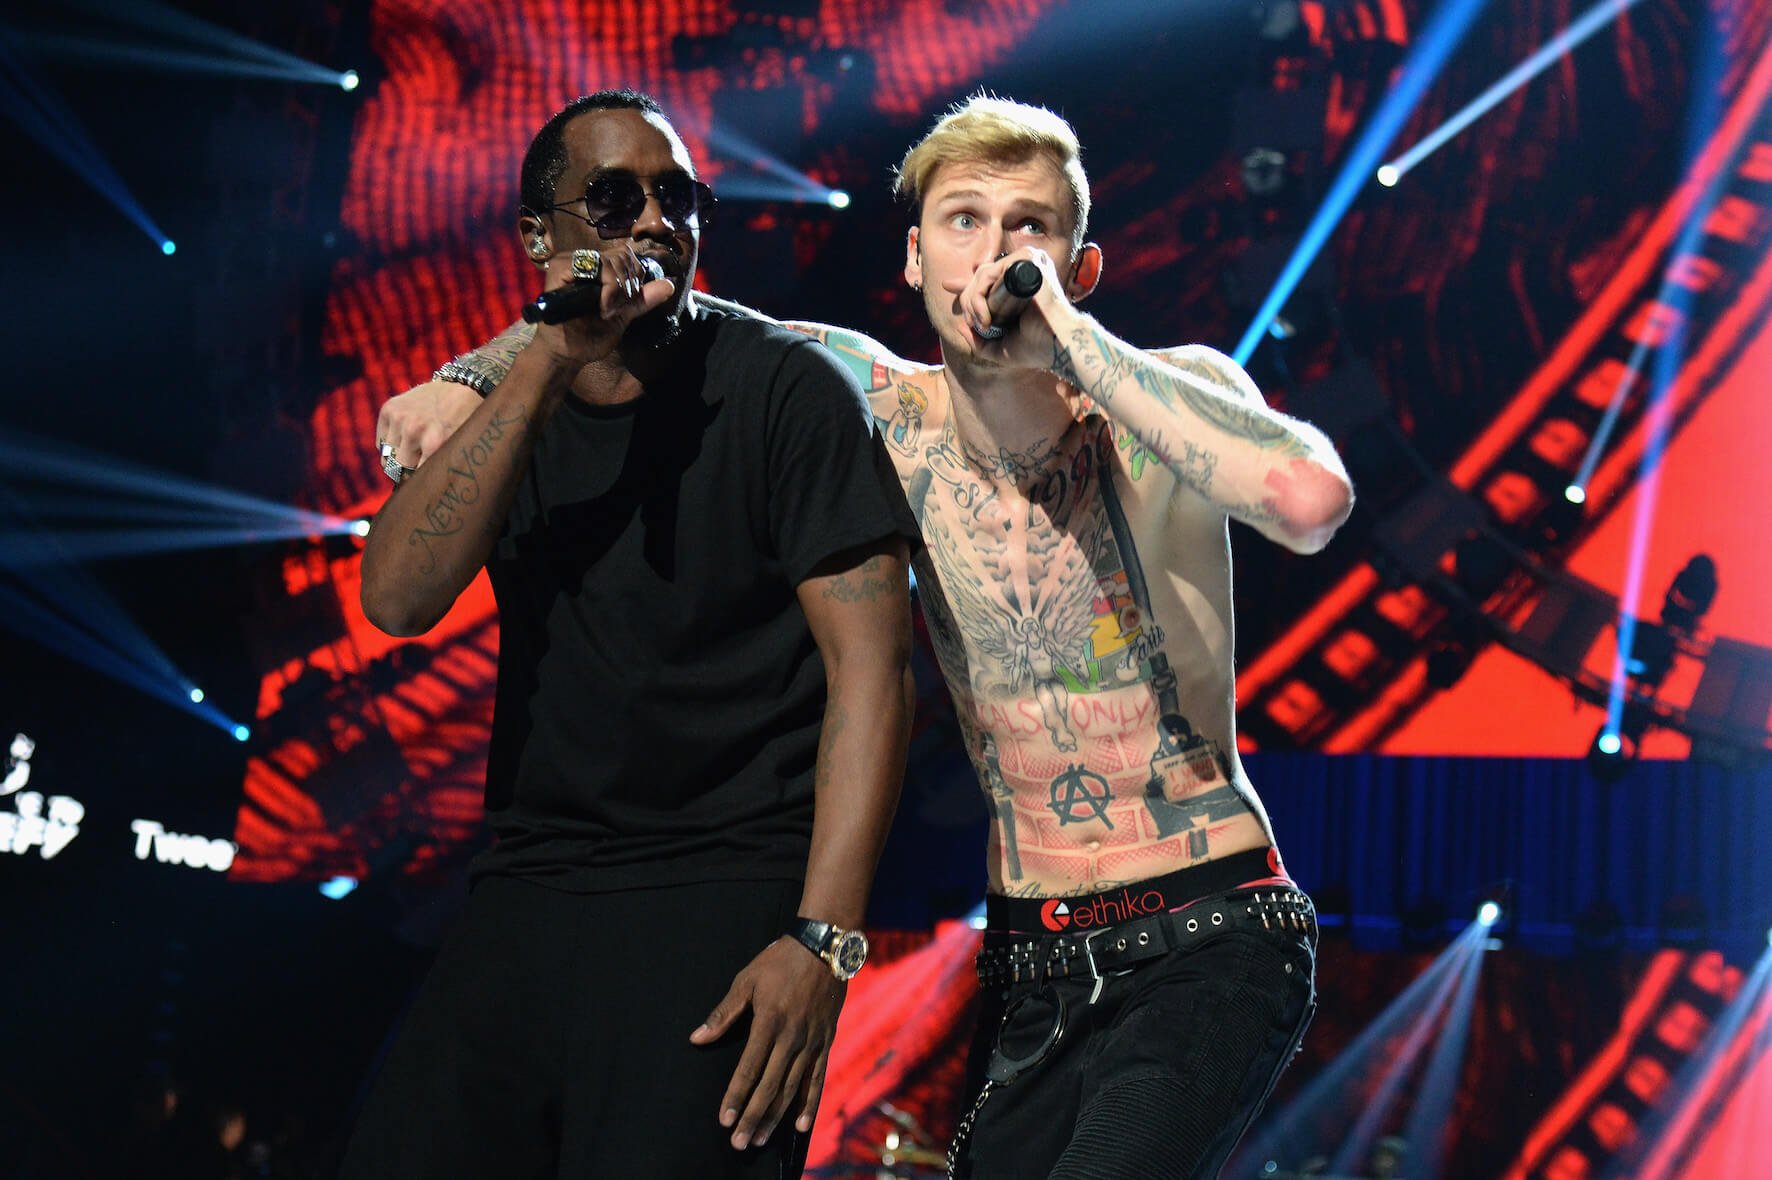 Sean 'P. Diddy' Combs singing on stage with Machine Gun Kelly in 2015